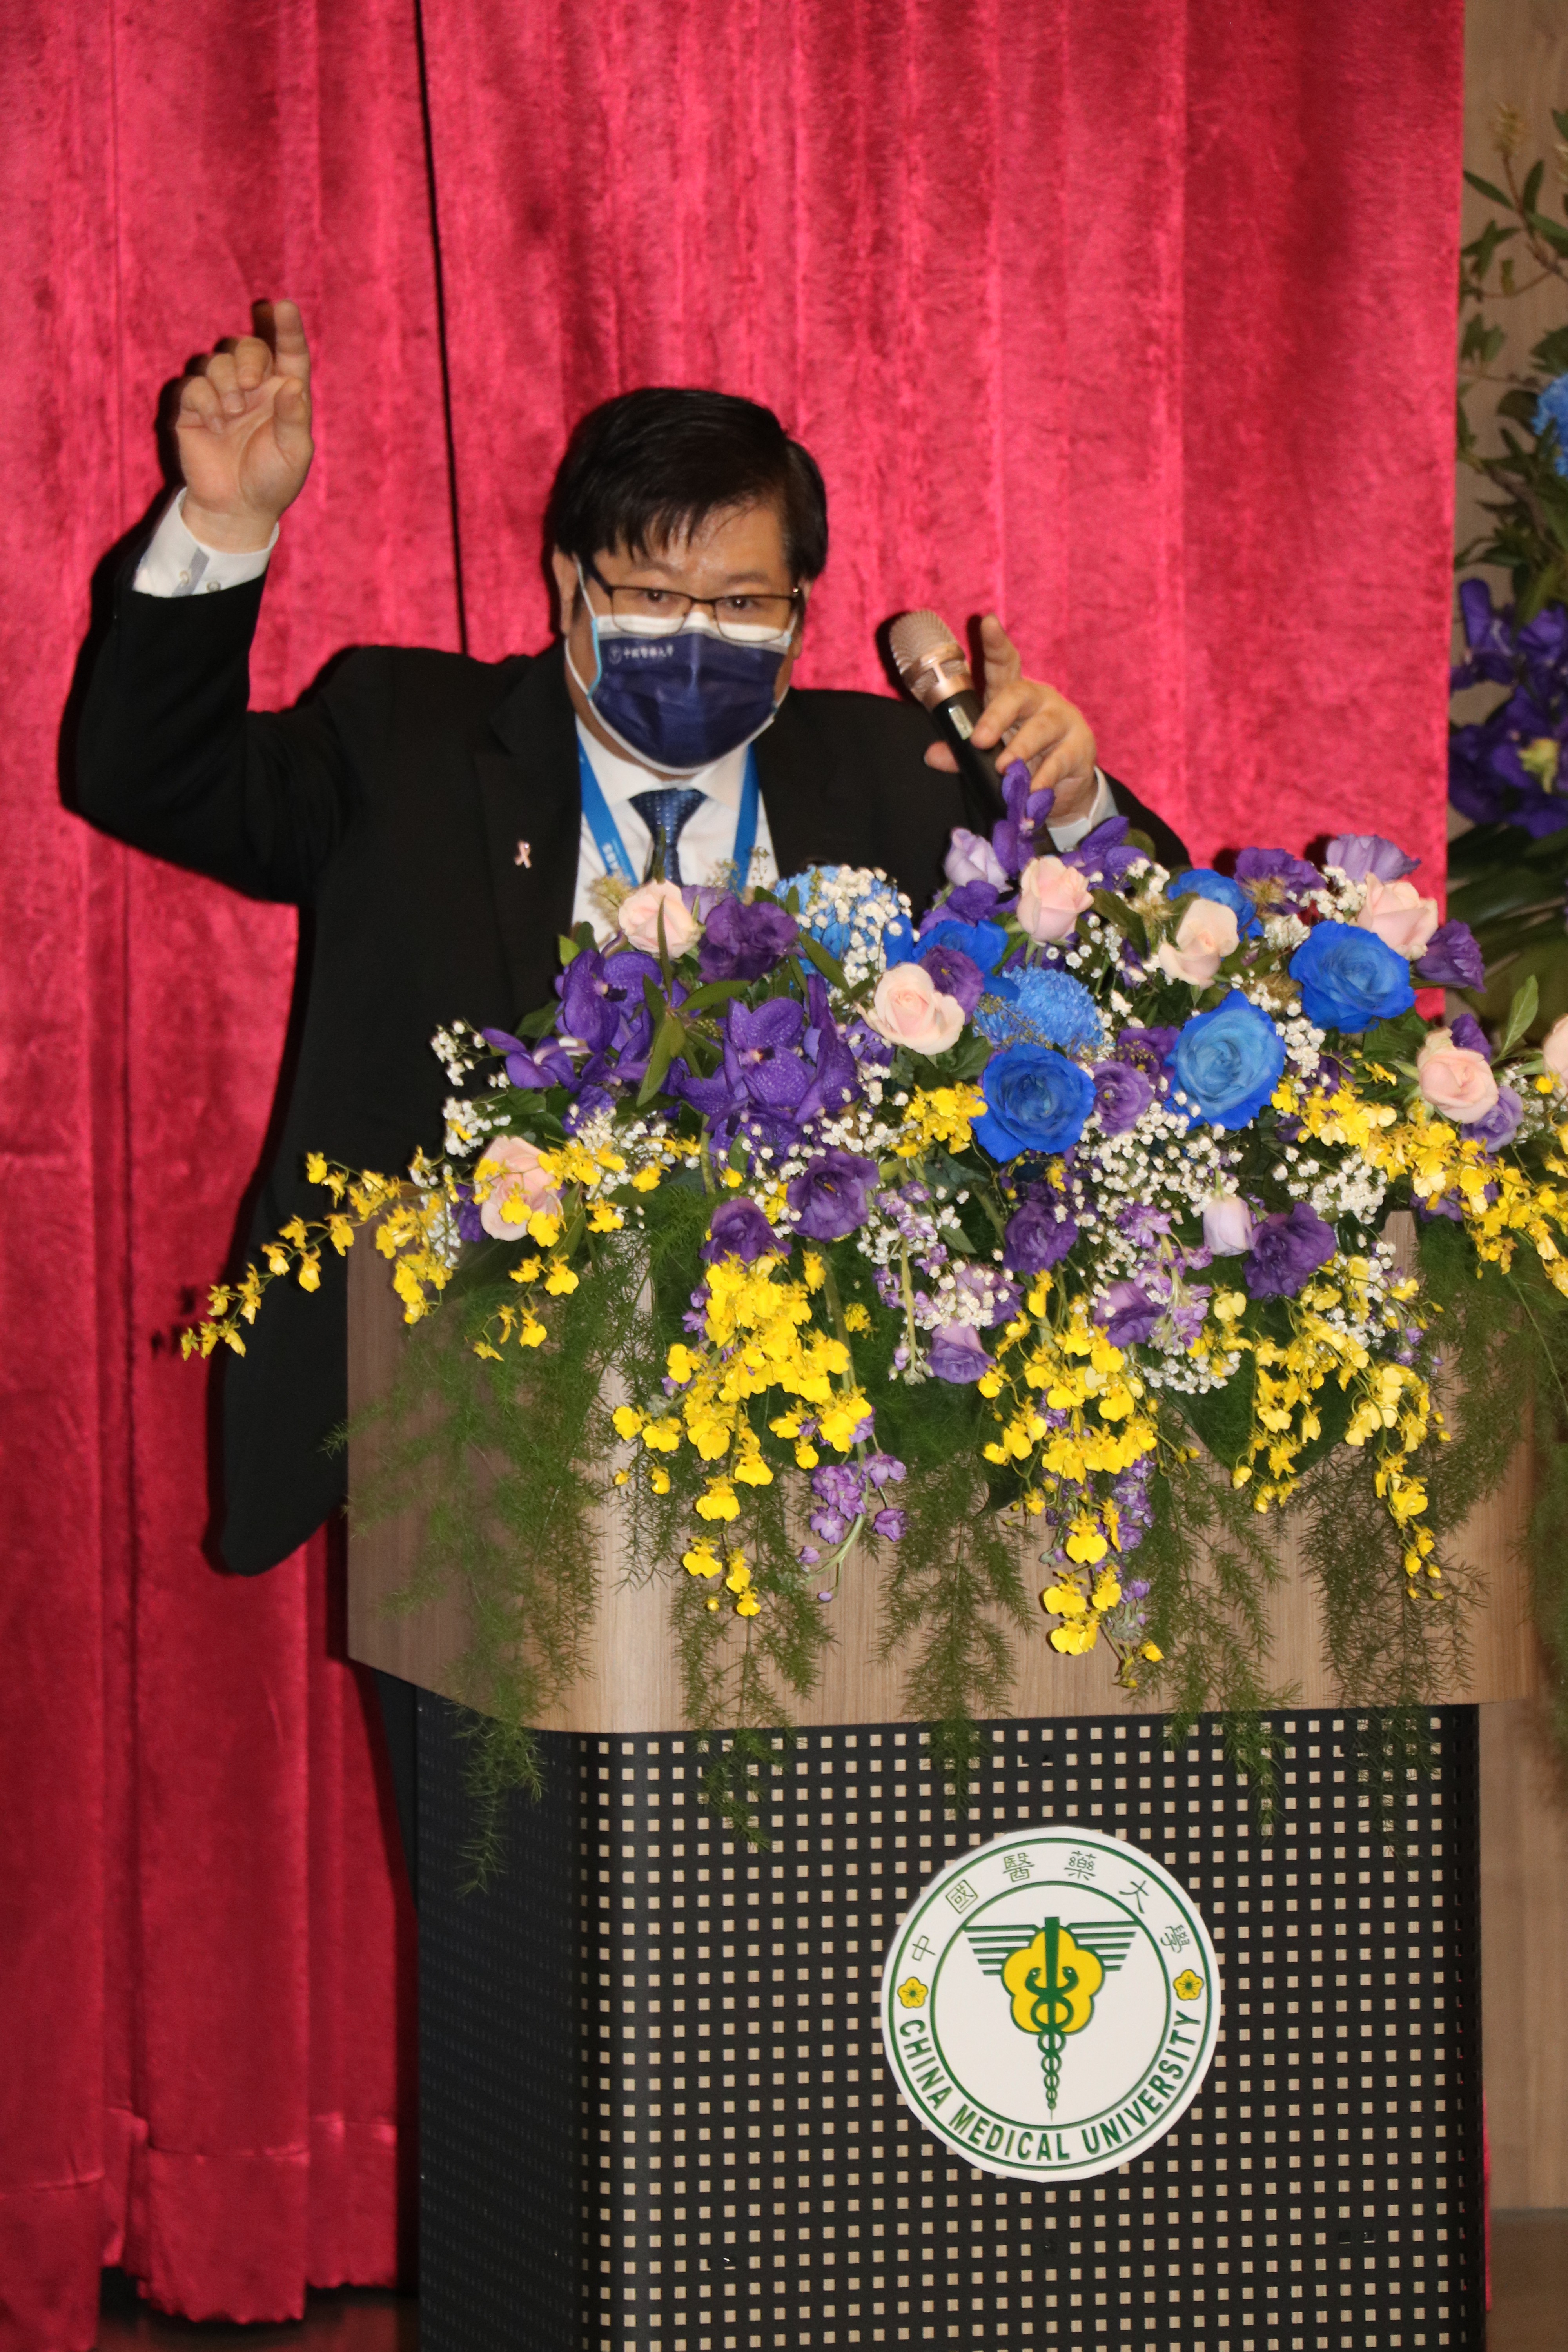 Dr. Mien-Chie Hung, President of China Medical University, through his academic connections and influence, inviting seventeen internationally renowned cancer specialists and scholars.